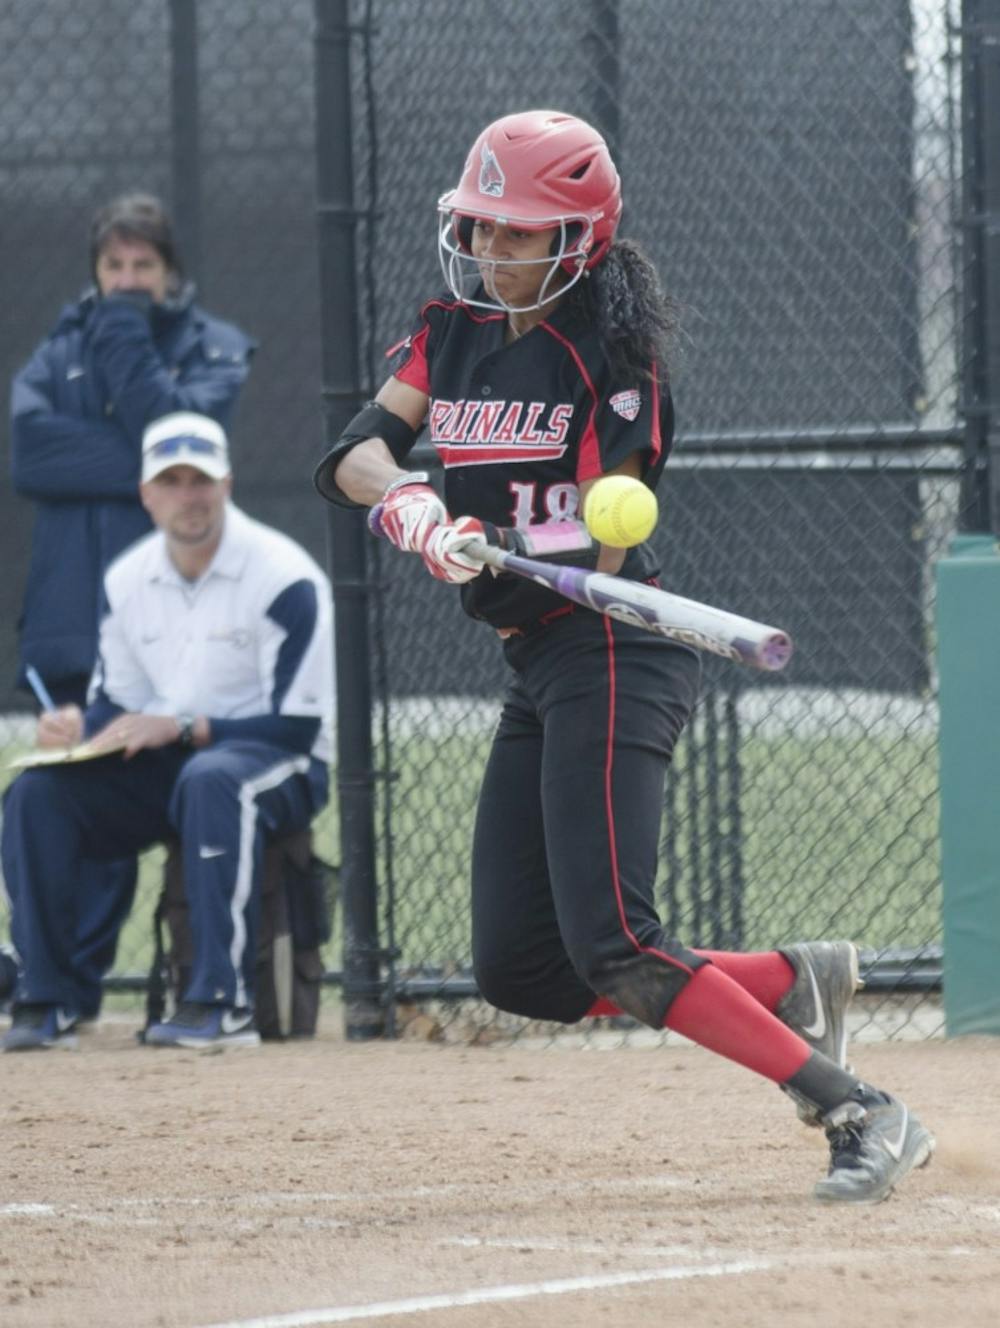 <p>Sophomore Briana Evans hits the ball in the game against Toledo on April 6 at the Ball State Softball Complex. Evans led the team in hits with three in May 7's first-round game of the Mid-American Conference Tournament. DN FILE PHOTO BREANNA DAUGHERTY</p>